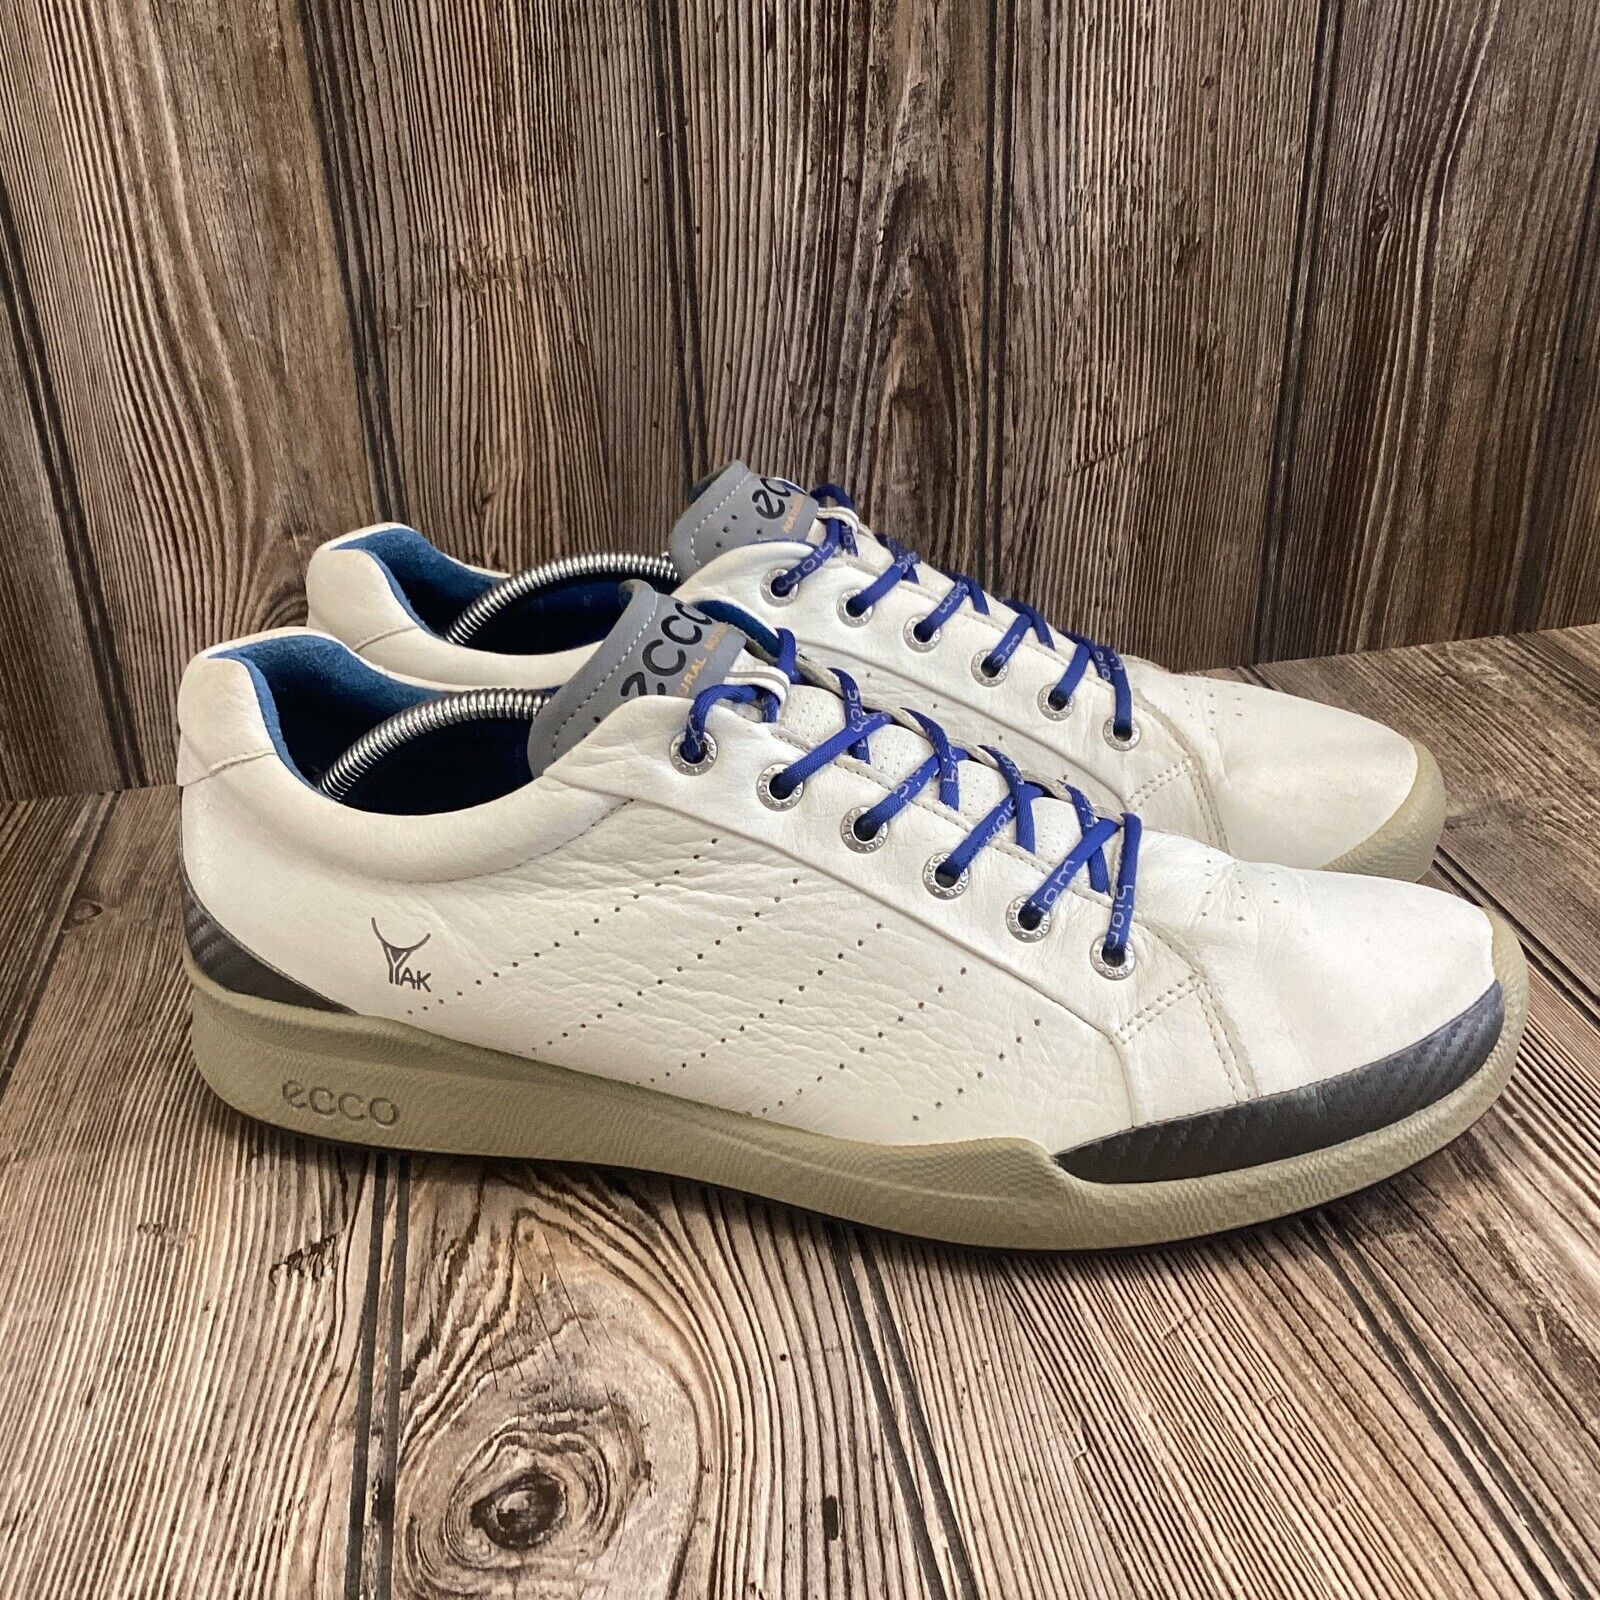 Ecco Biom Natural Motion Yak Leather White Golf Shoes Mens Size 46-12 US